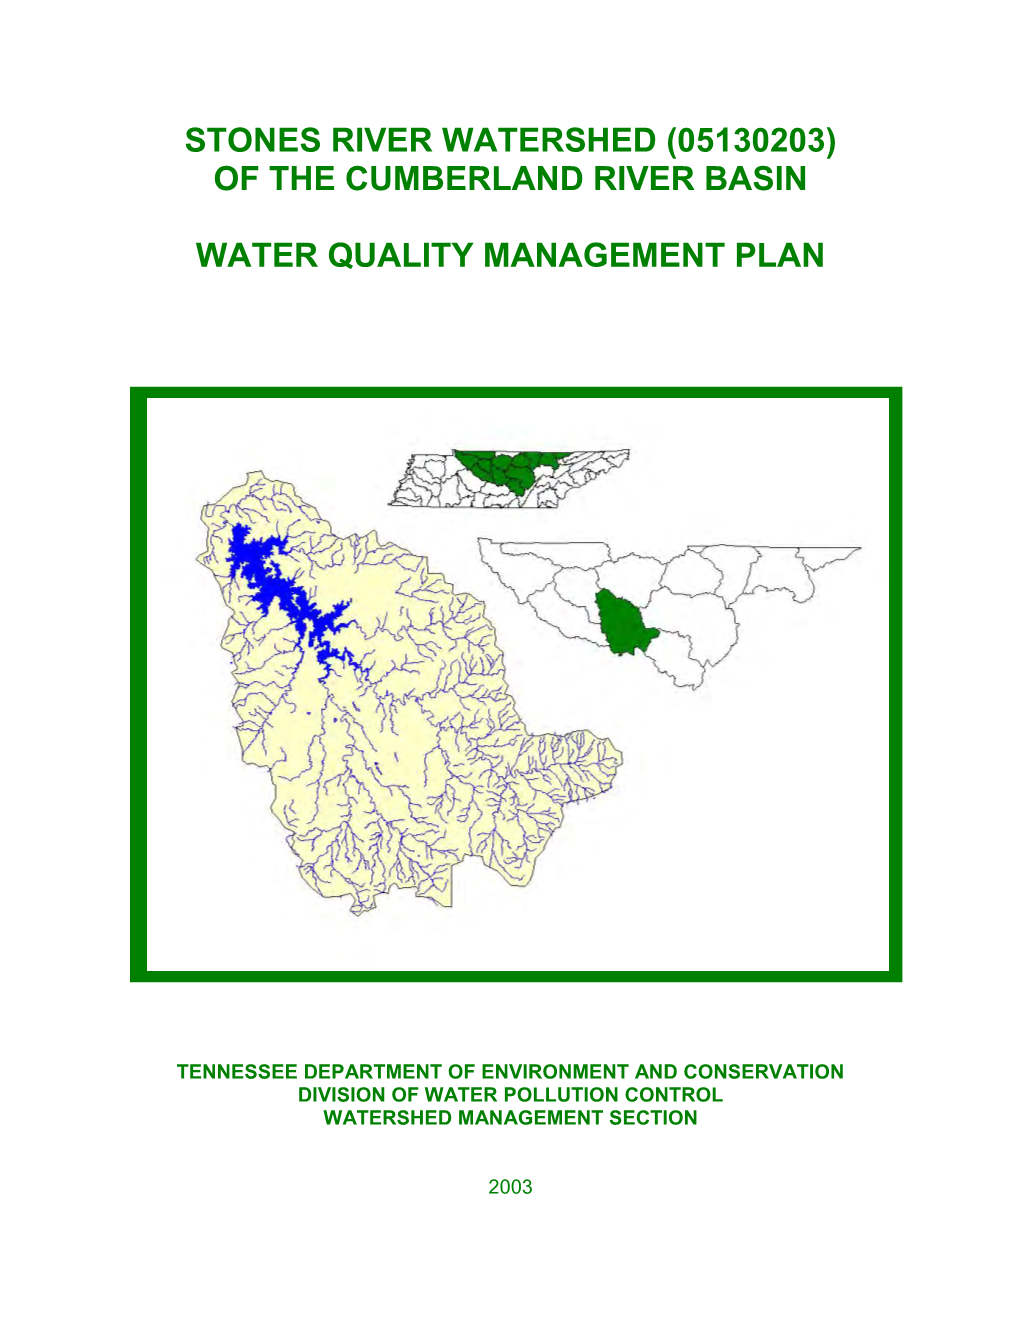 Of the Cumberland River Basin Water Quality Management Plan